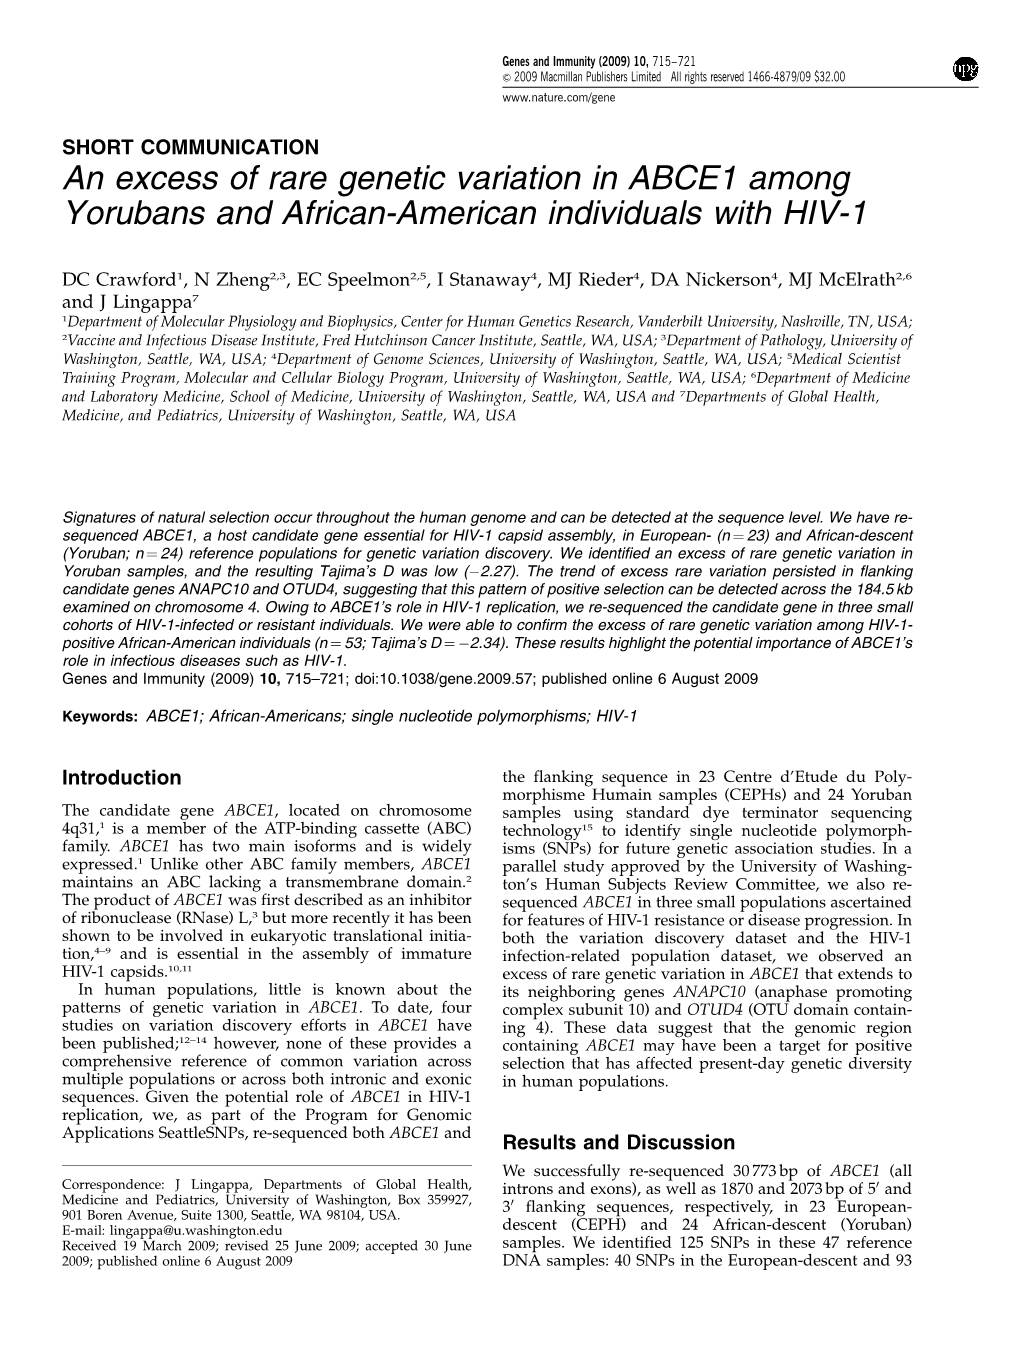 An Excess of Rare Genetic Variation in ABCE1 Among Yorubans and African-American Individuals with HIV-1